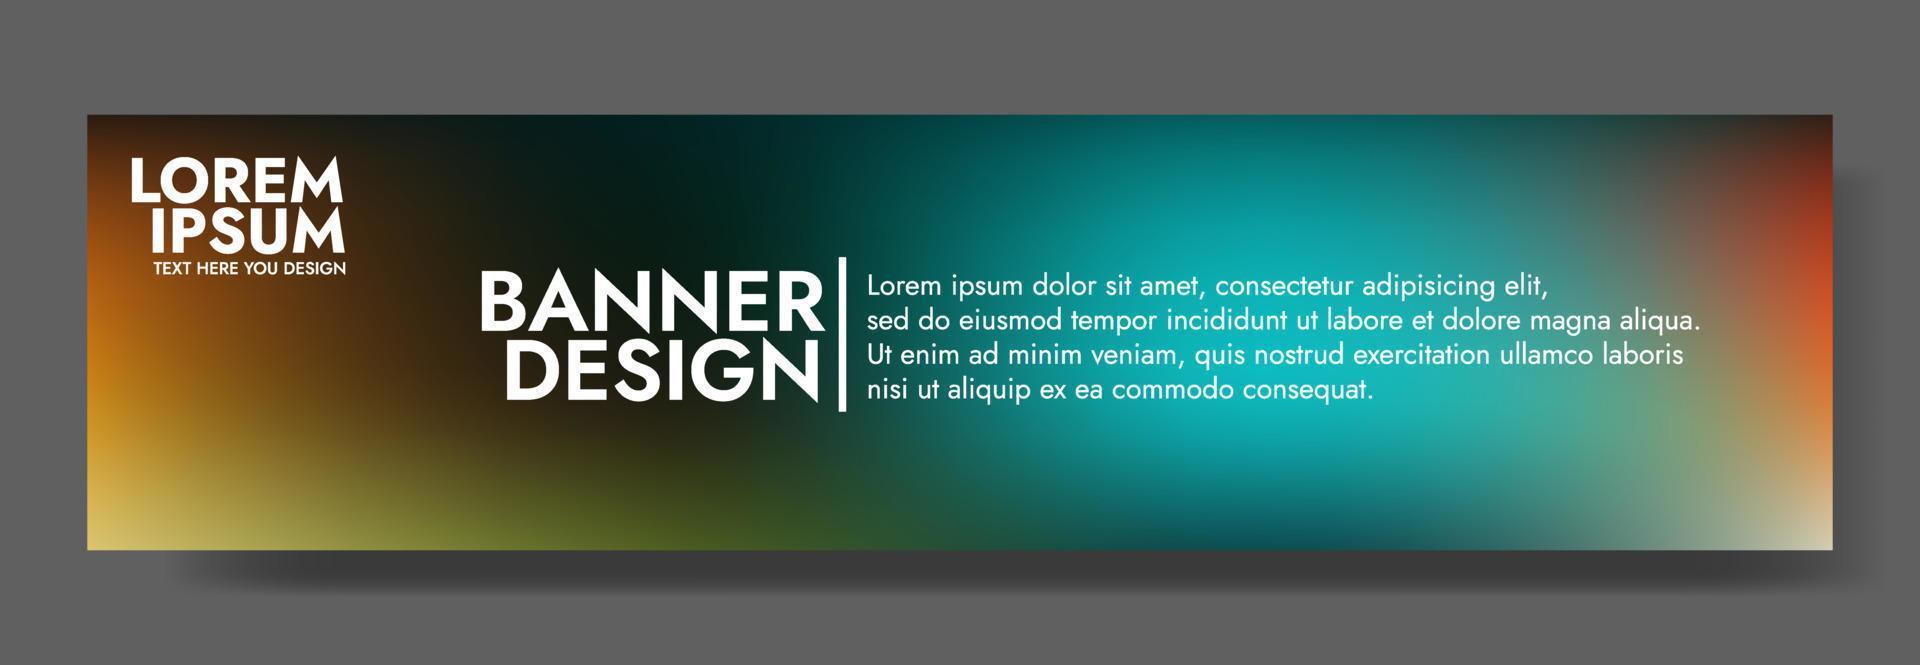 Abstract Green and blue Gradient mesh Banner Template. vector